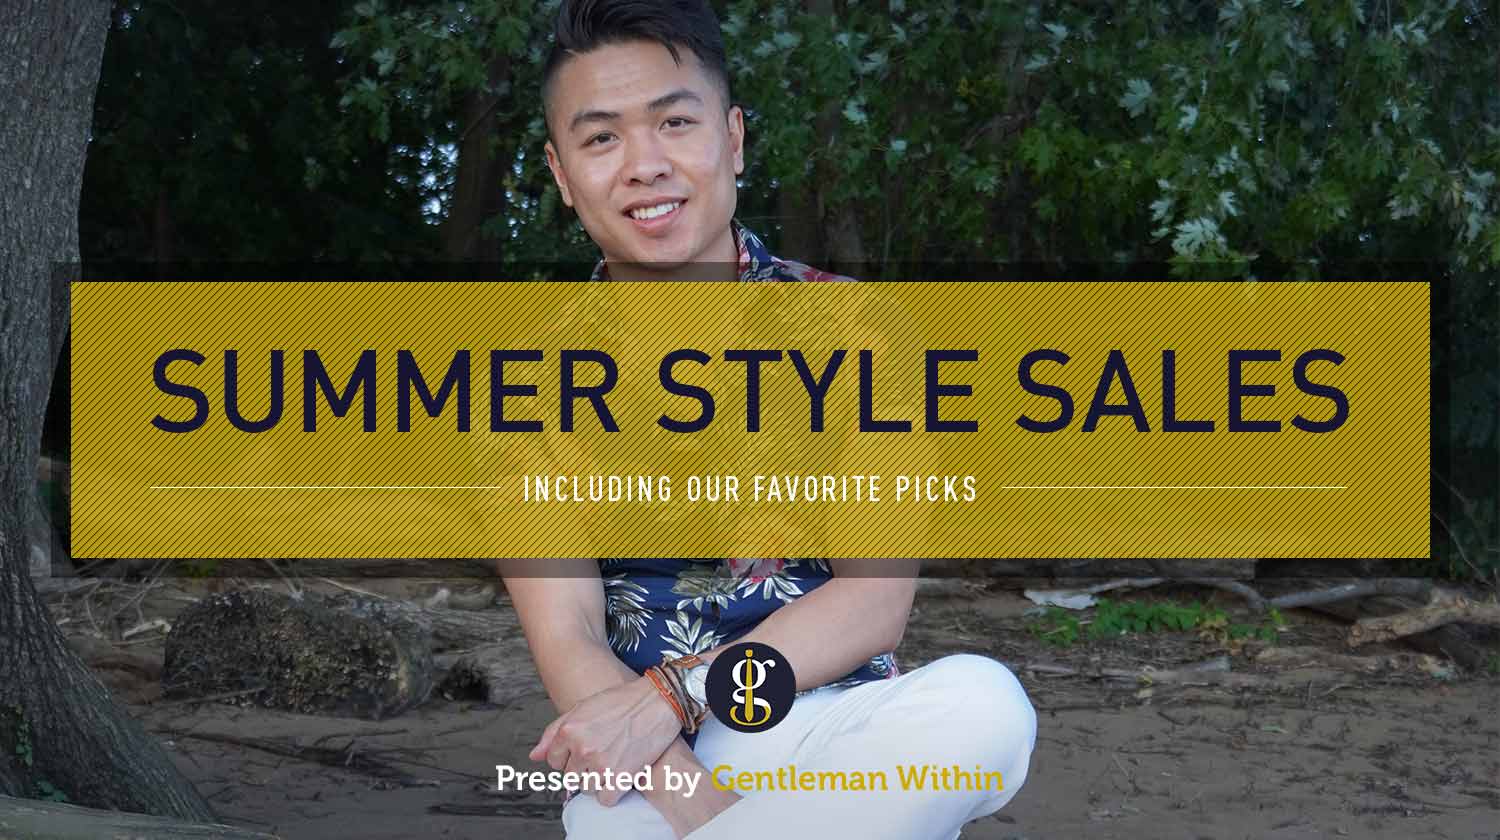 Slammin' Summer Style Sales 2021 (Including Our Favorite Picks) | GENTLEMAN WITHIN